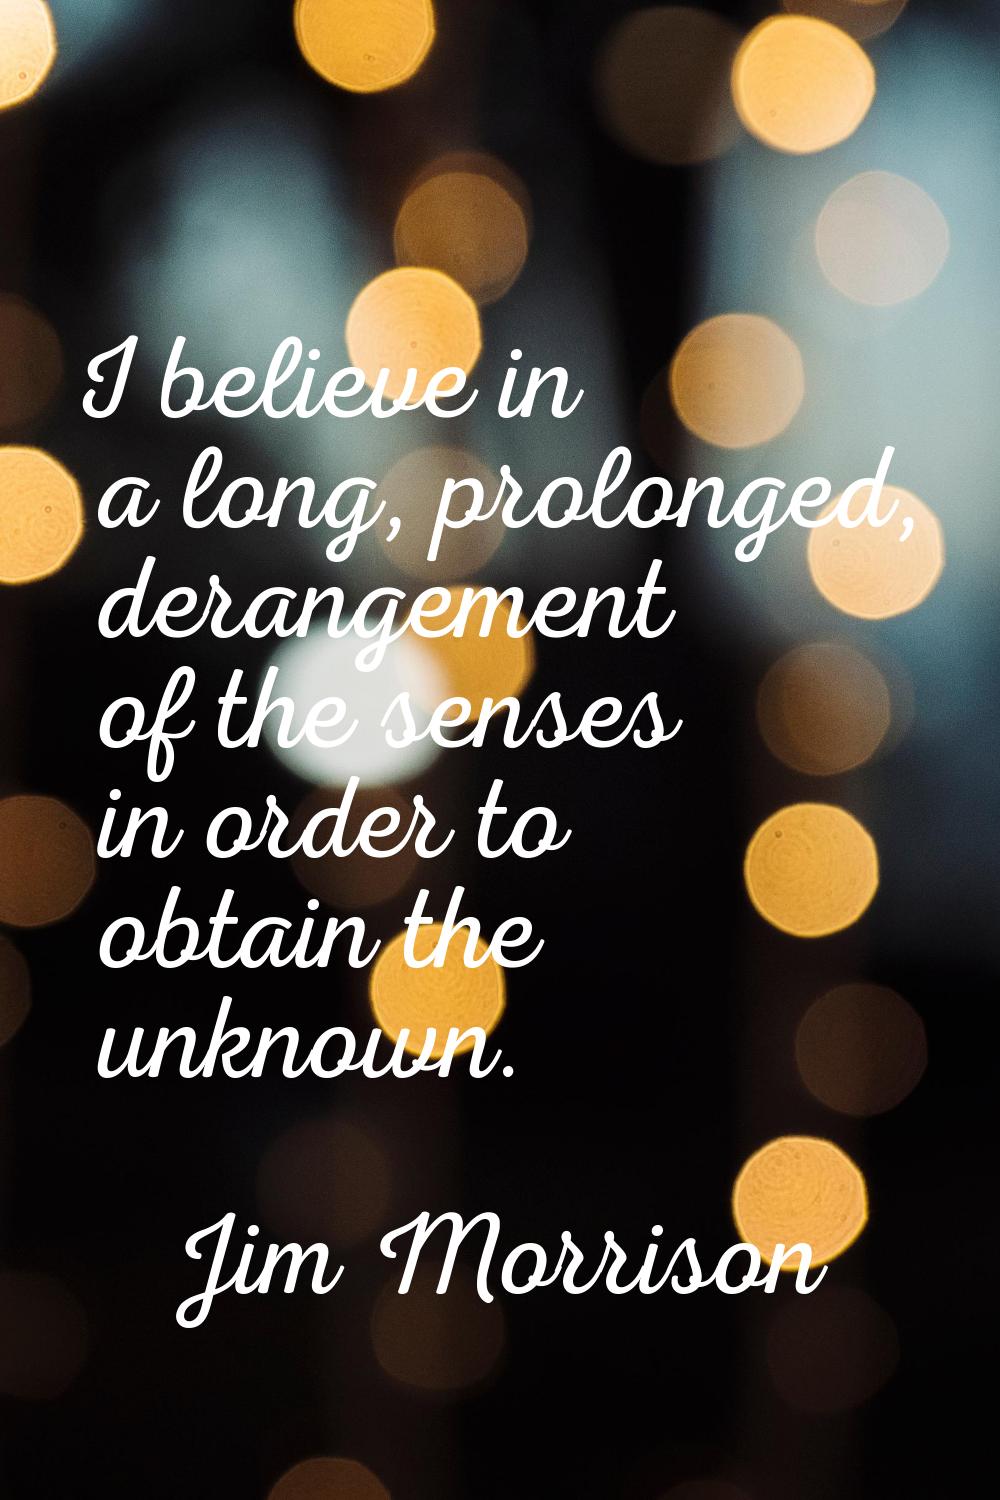 I believe in a long, prolonged, derangement of the senses in order to obtain the unknown.